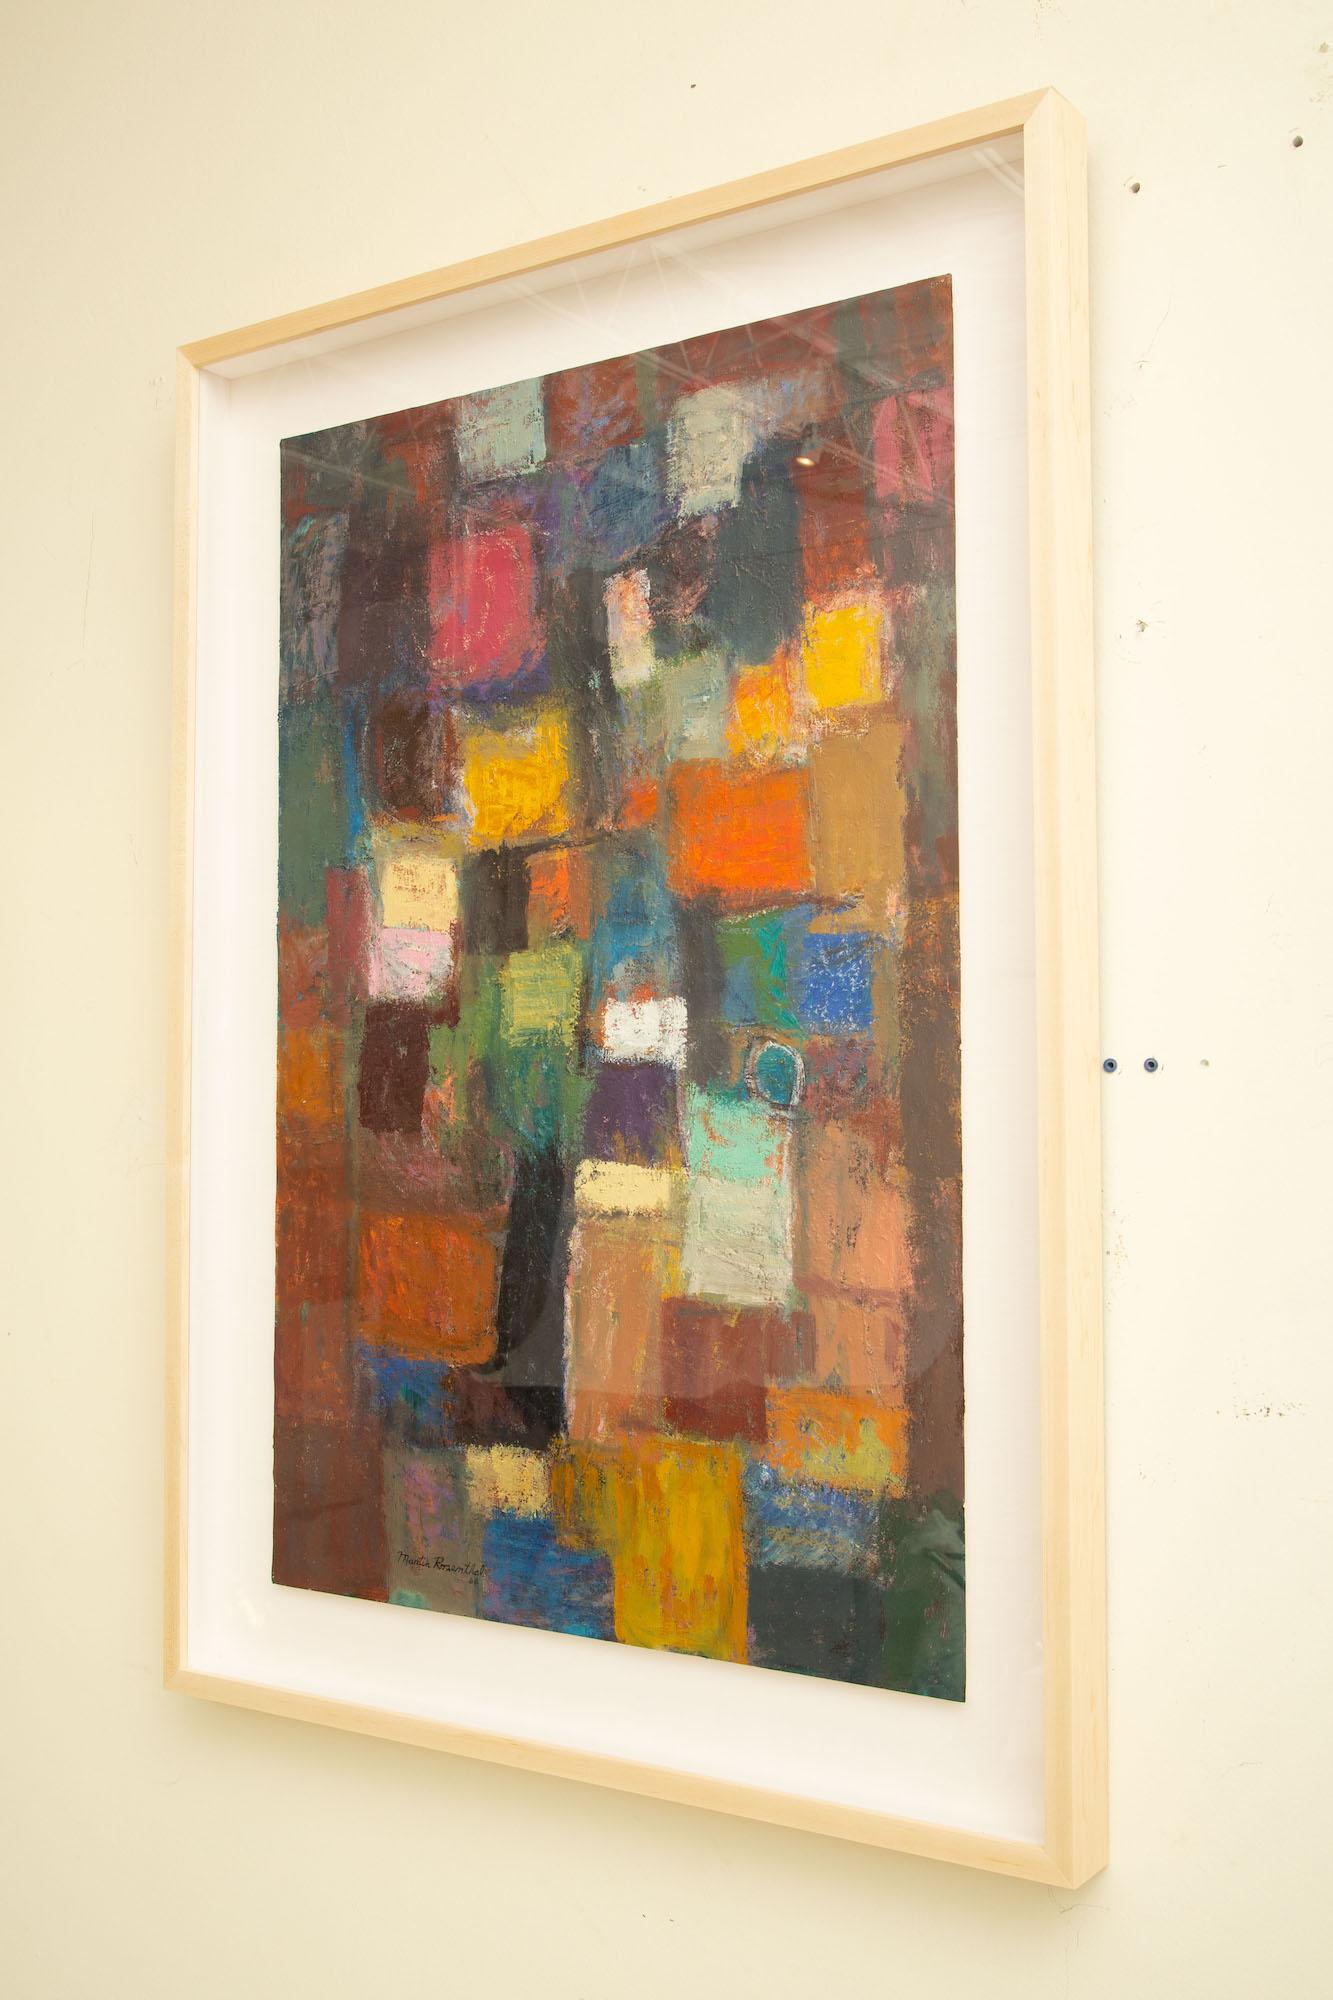 This wonderful and colorful vertical abstract signed and dated oil on paper by Martin Rosenthal 1968 has newly been custom framed in a light wood frame to compliment the multitude of glorious colors. It has a float of a white linen mat surround and